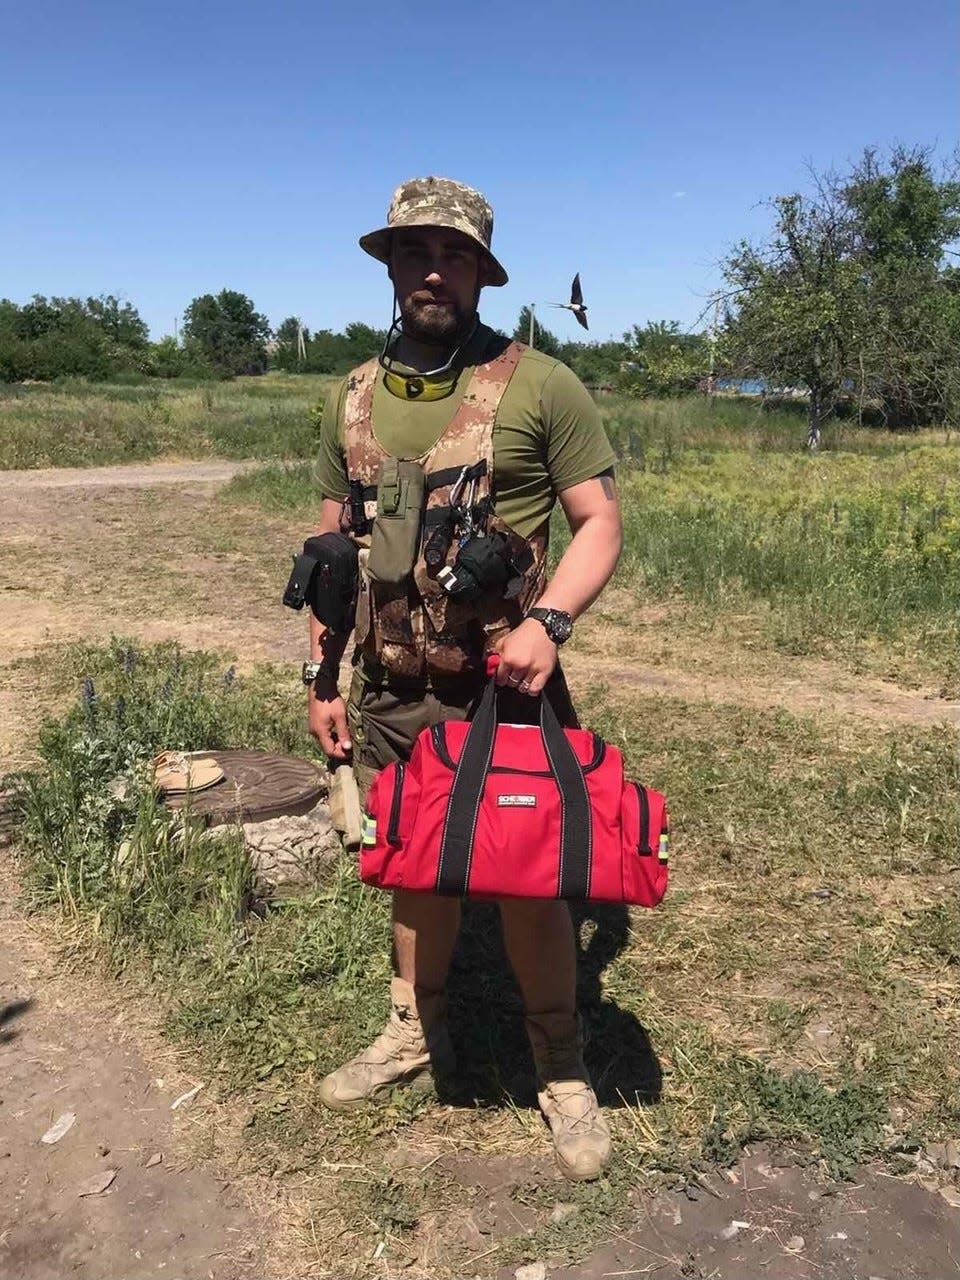 A field medic in Ukraine sometime around the first week of June 2022 — most likely somewhere near Kharkiv, Luhansk or Mykolaiv — holds a trauma bag donated by Mary Greeley Medical Center in Ames. The hospital donated 20 such bags for first responders to Iowa Sister States, which had the bags packed in with a large shipment of meals bound for Cherkasy, Ukraine, from West Des Moines-based Meals from the Heartland.